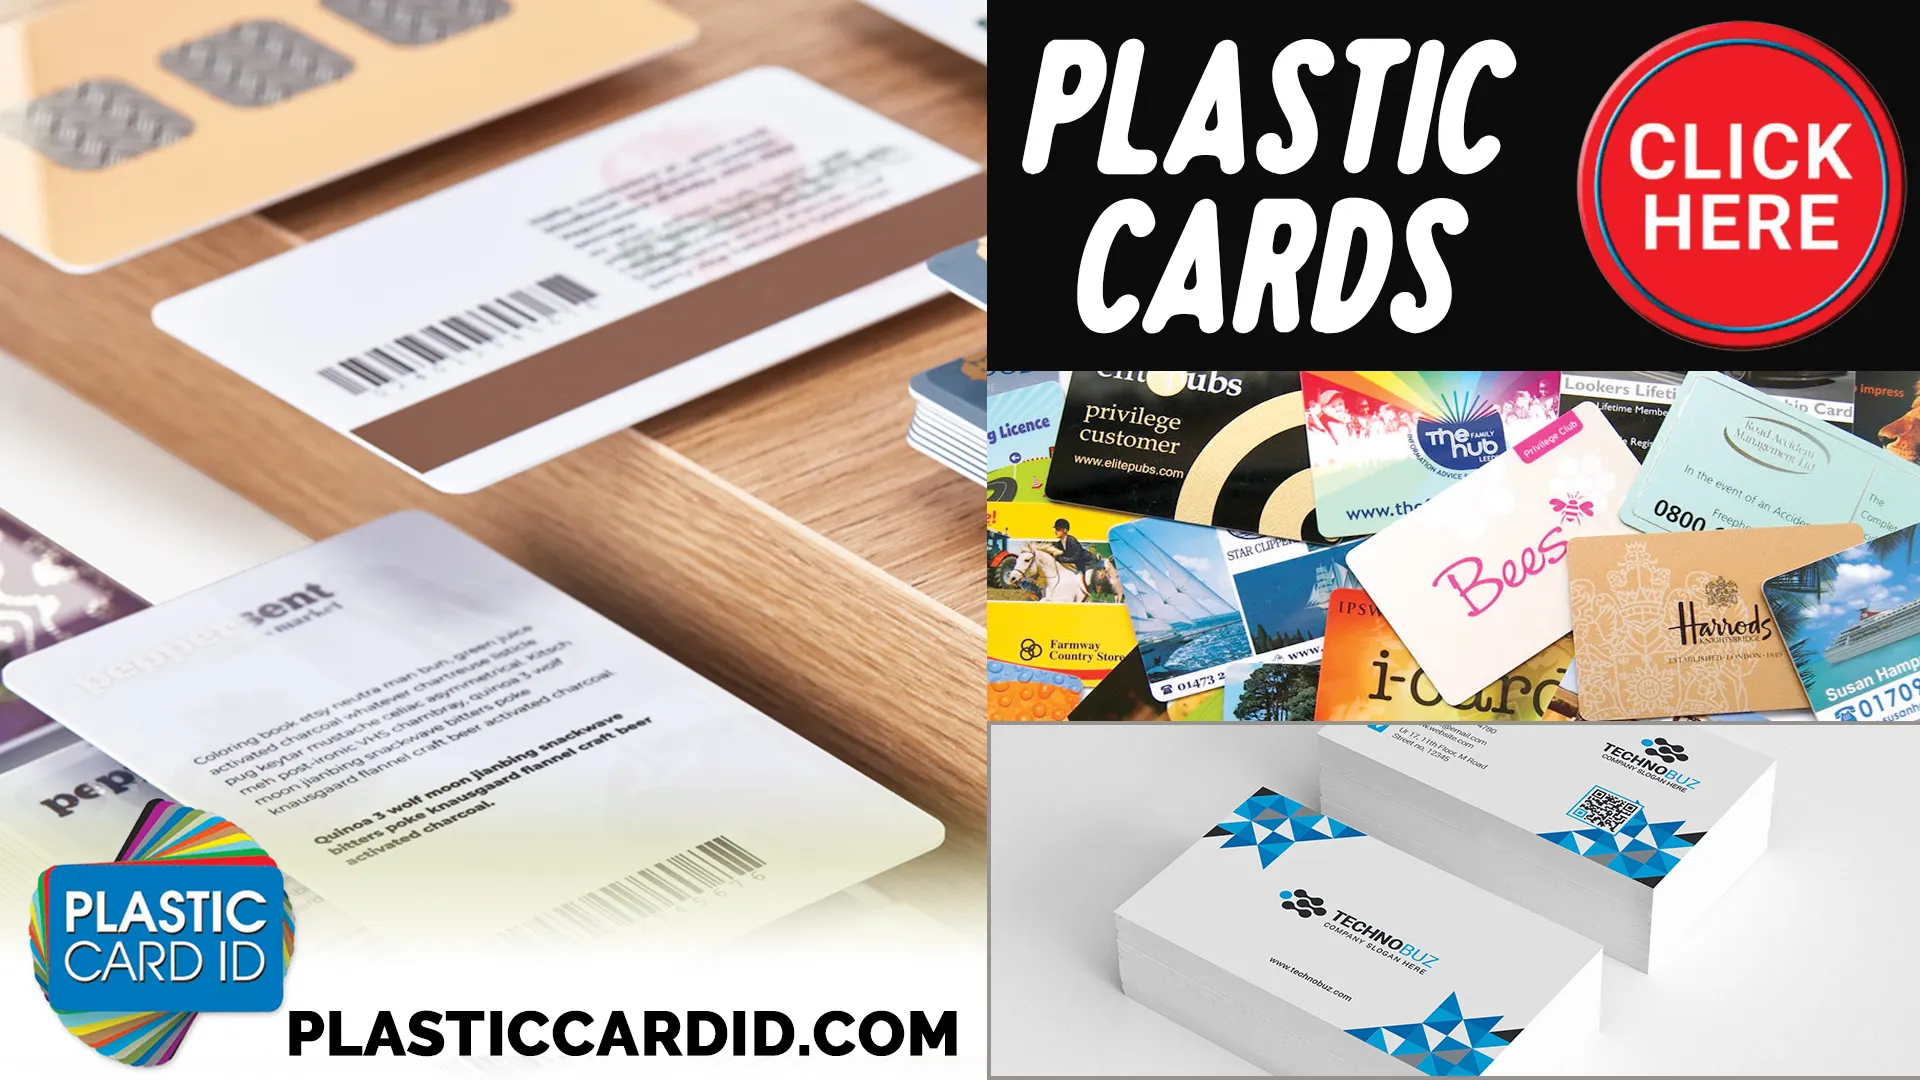 Plastic Card ID
's Commitment to Your Success